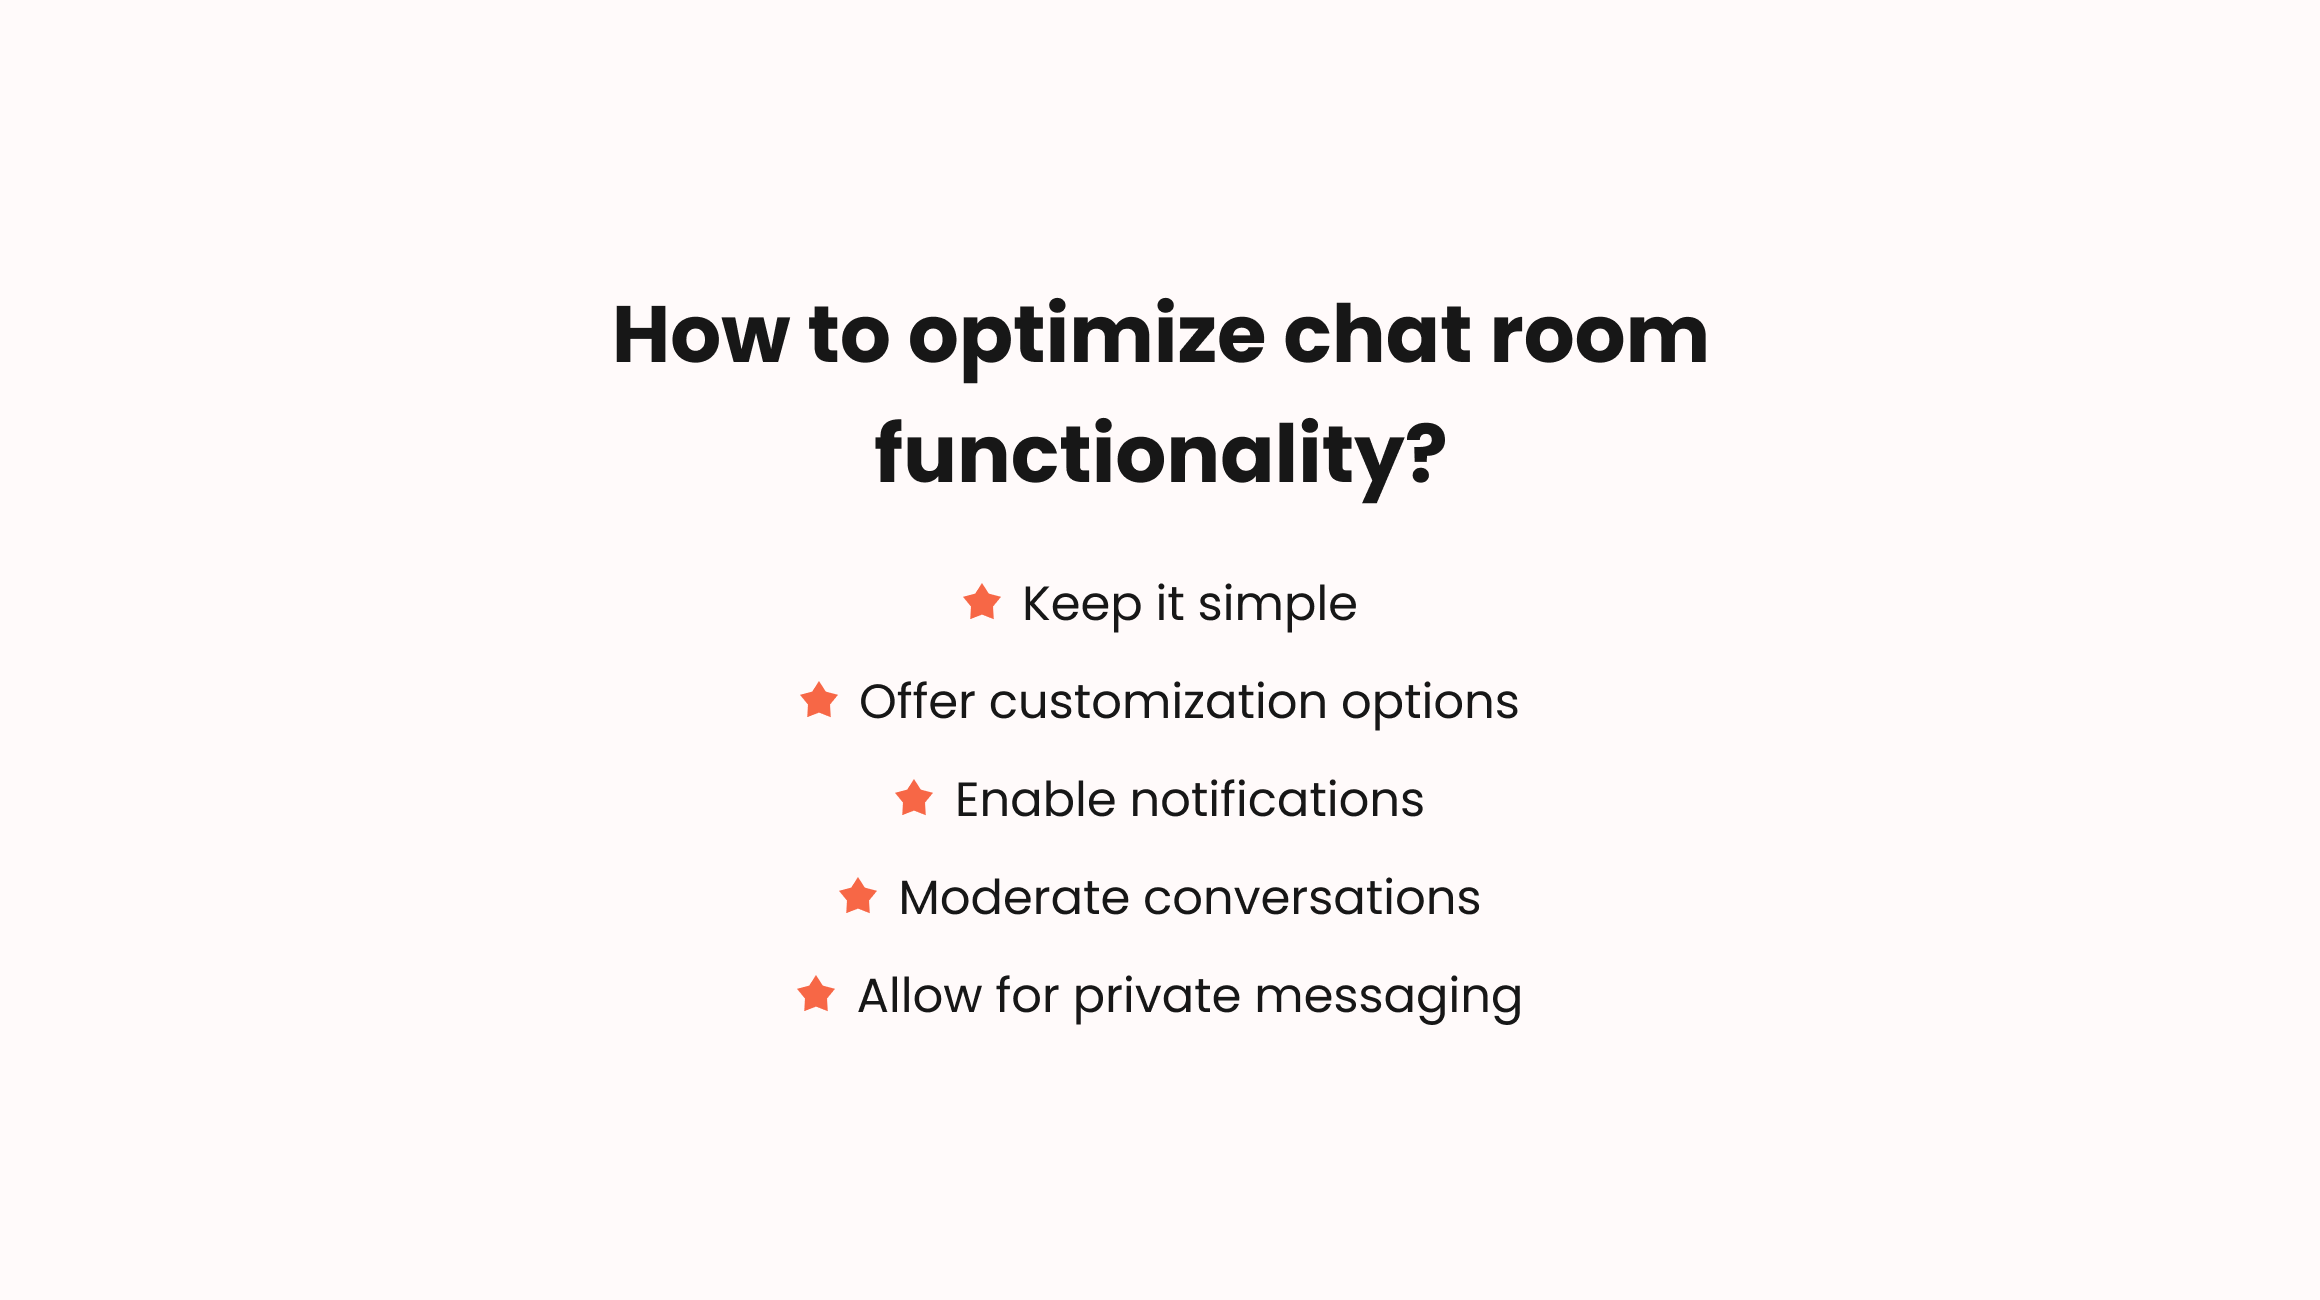 Tips for optimizing chat room functionality for your users